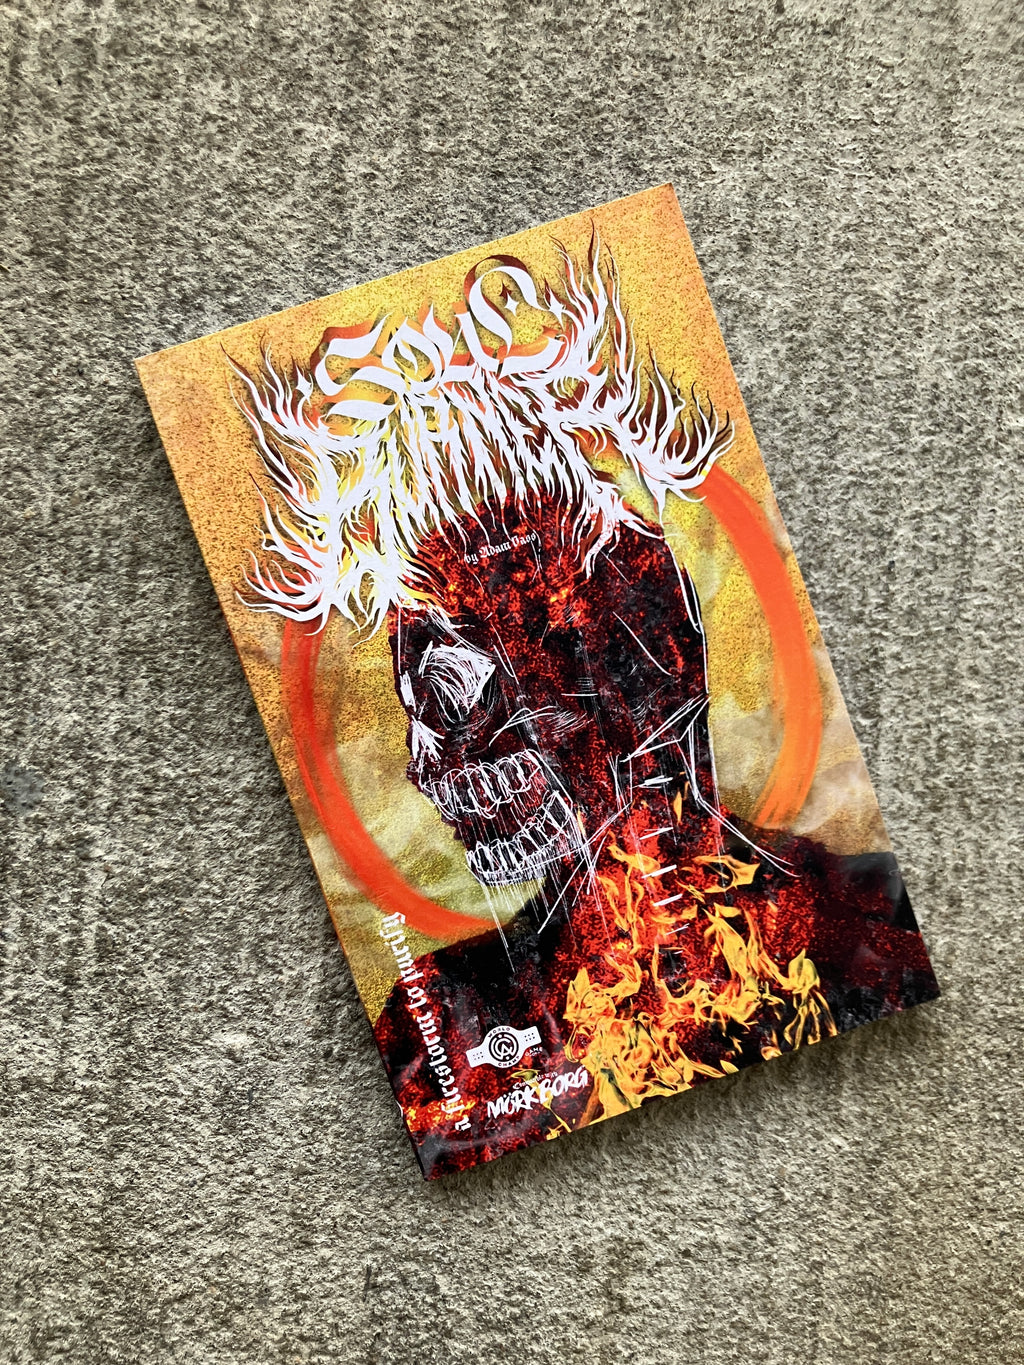 Soul Burner by World Champ Game Co book cover. The title is written in a heavy metal style and there is a silhouette from the shoulders up of a person. The silhouette looks like it is on fire and burning